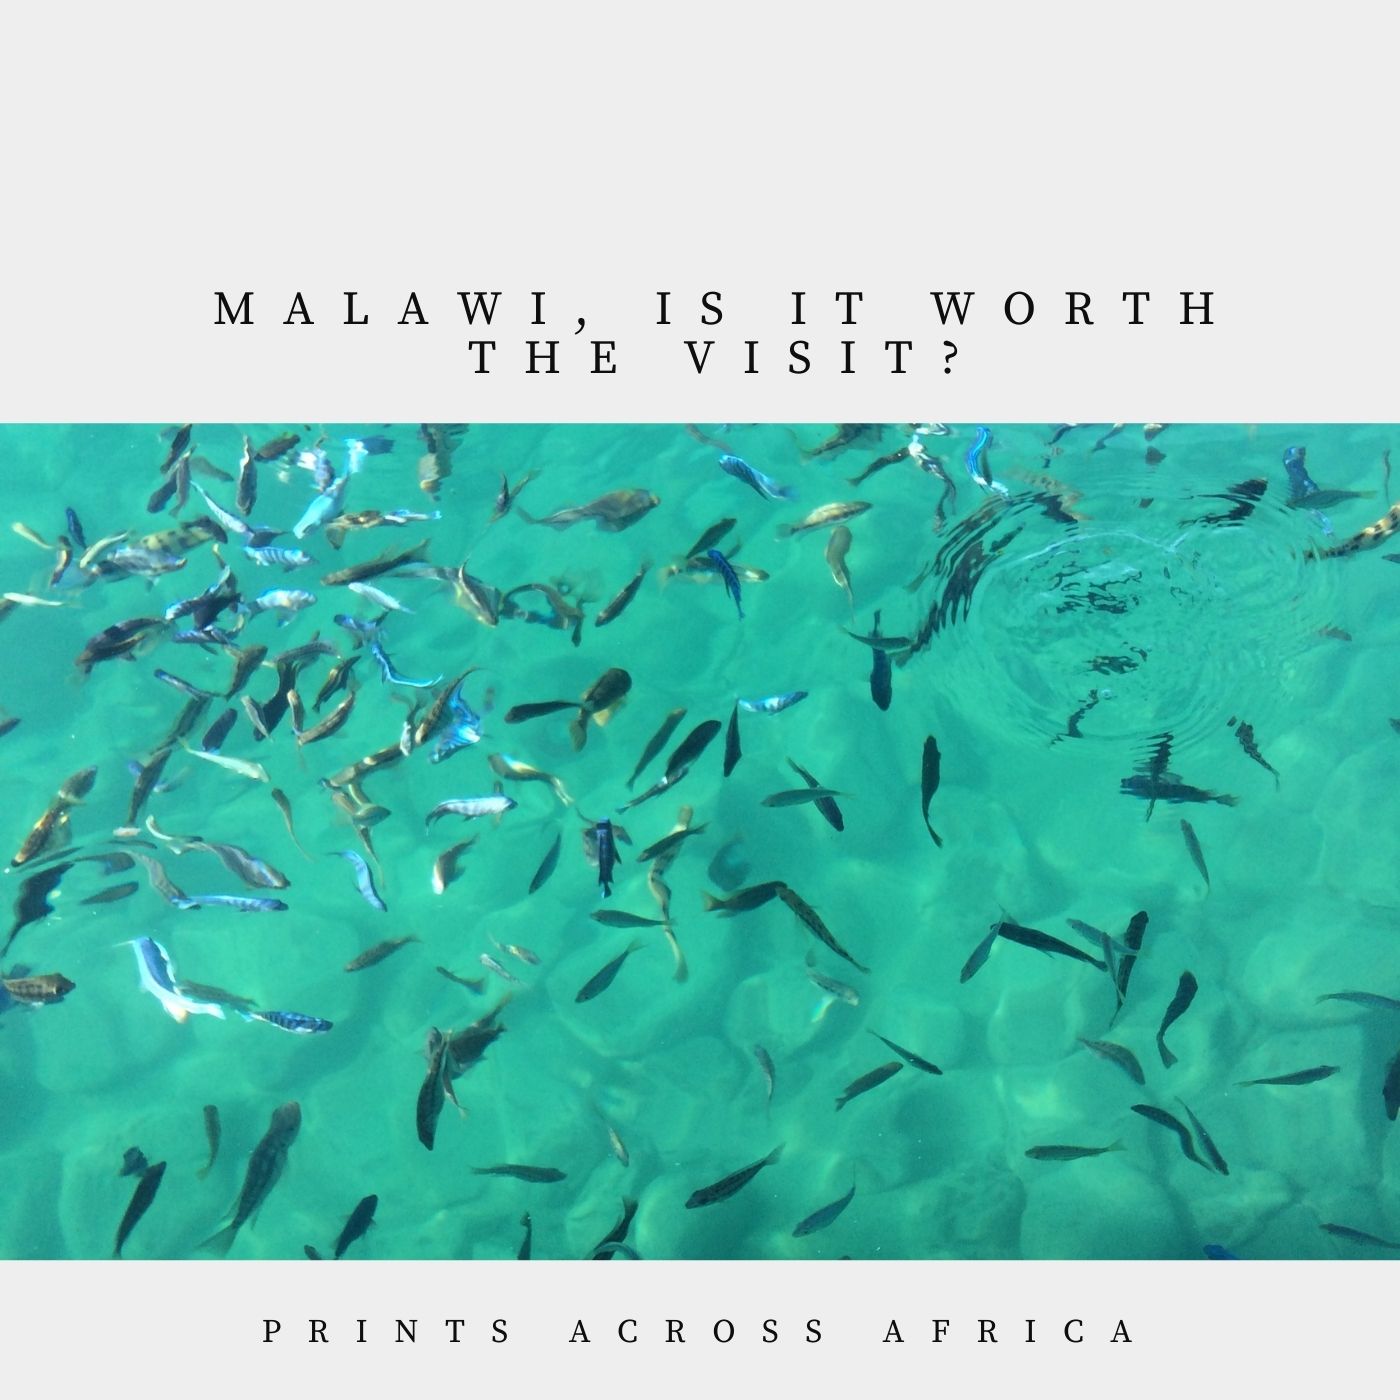 Malawi, is it worth the visit?